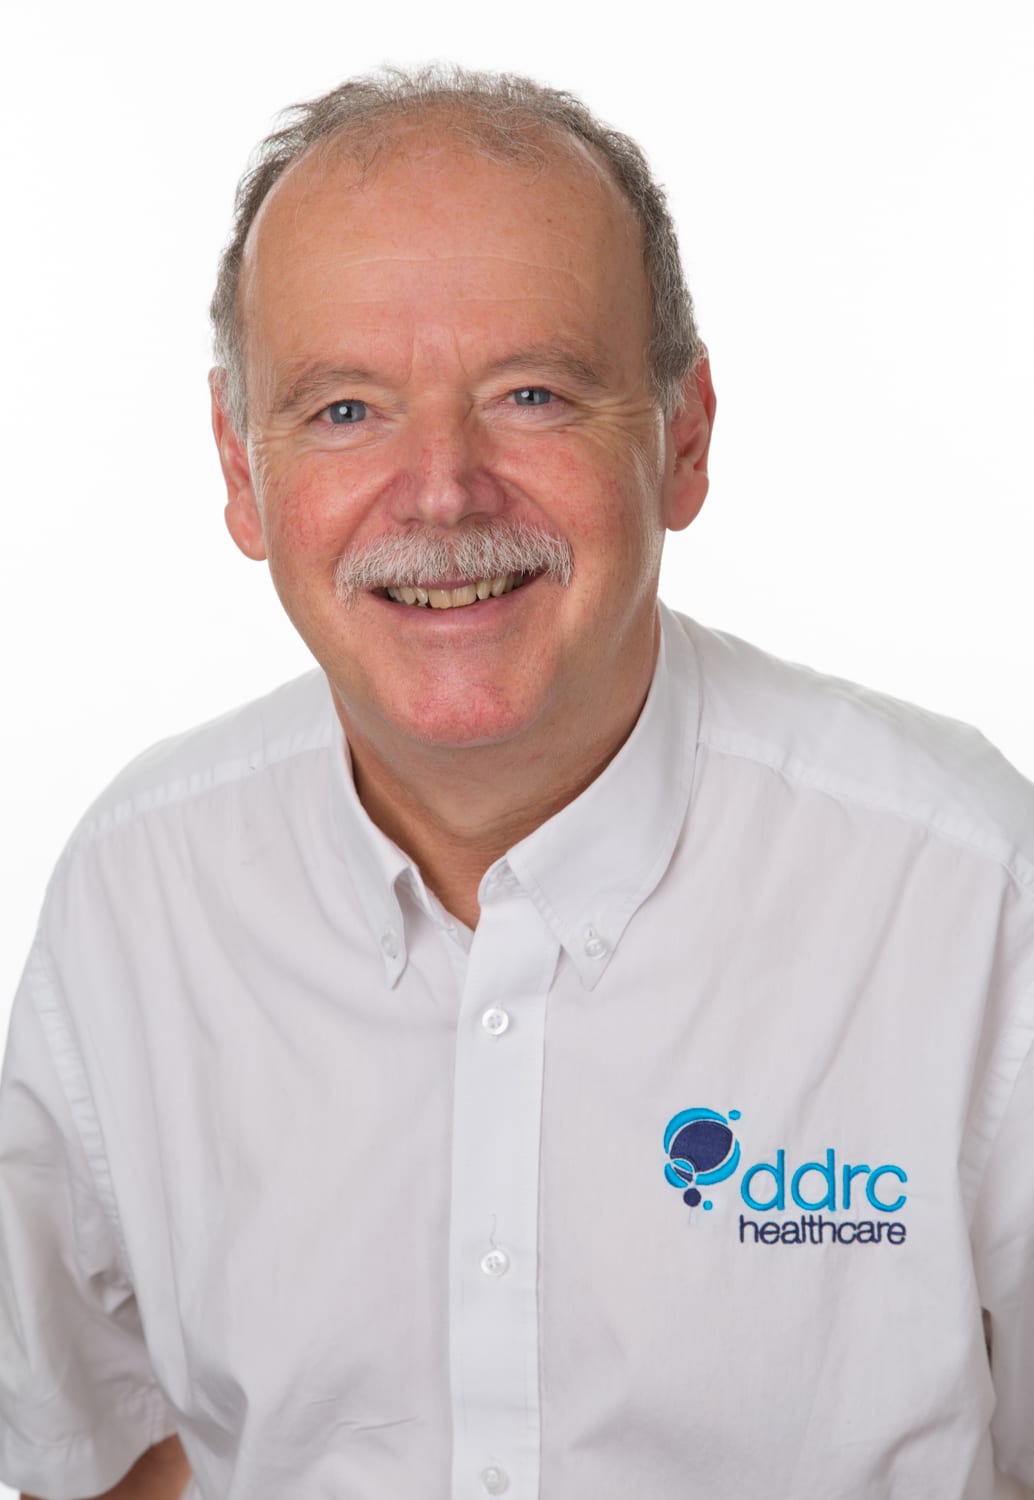 Headshot of Pete Atkey, Operations Director at DDRC